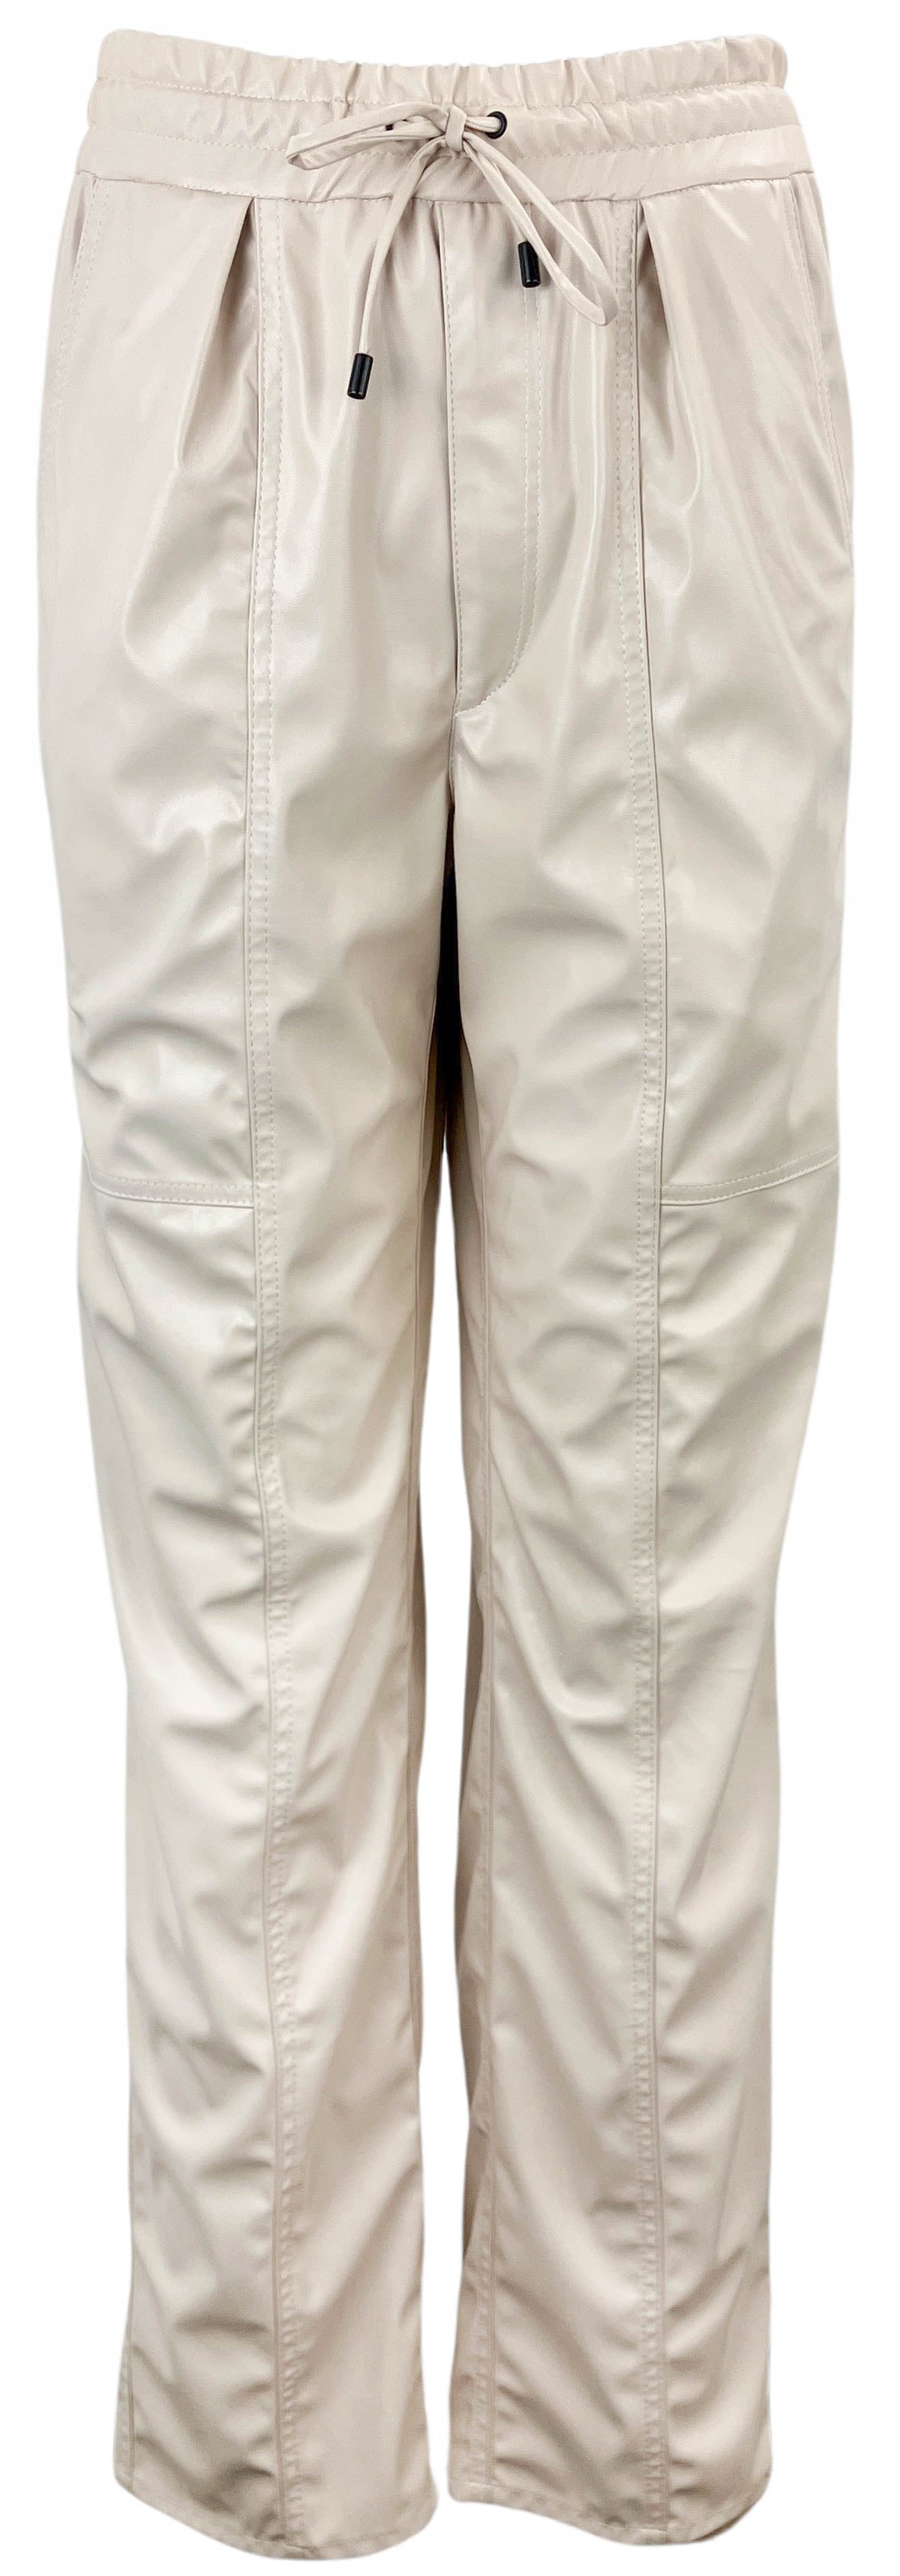 Isabel Marant Étoile Brina Faux Leather Pants in Chalk - Discounts on Isabel Marant at UAL